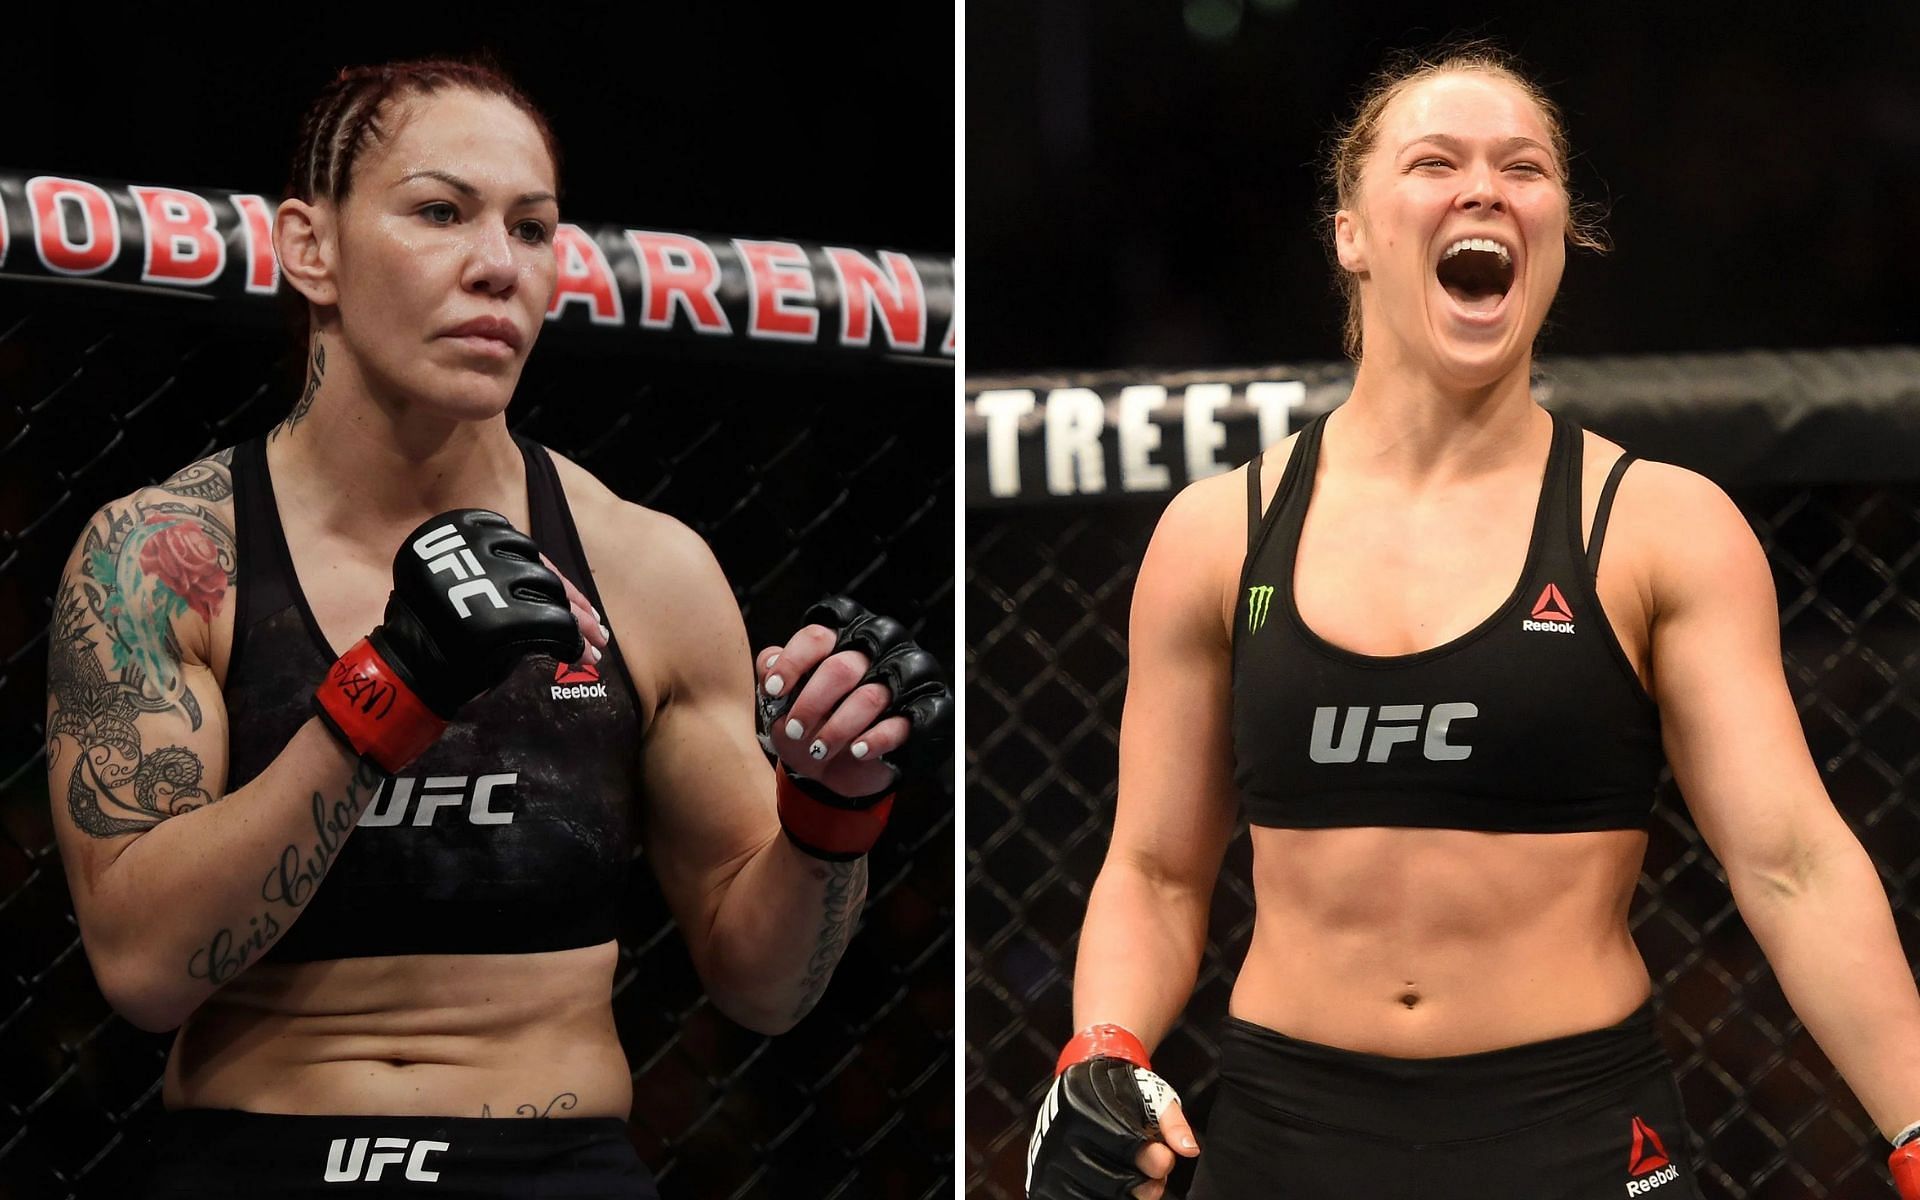 (Left) Cris Cyborg and (Right) Ronda Rousey